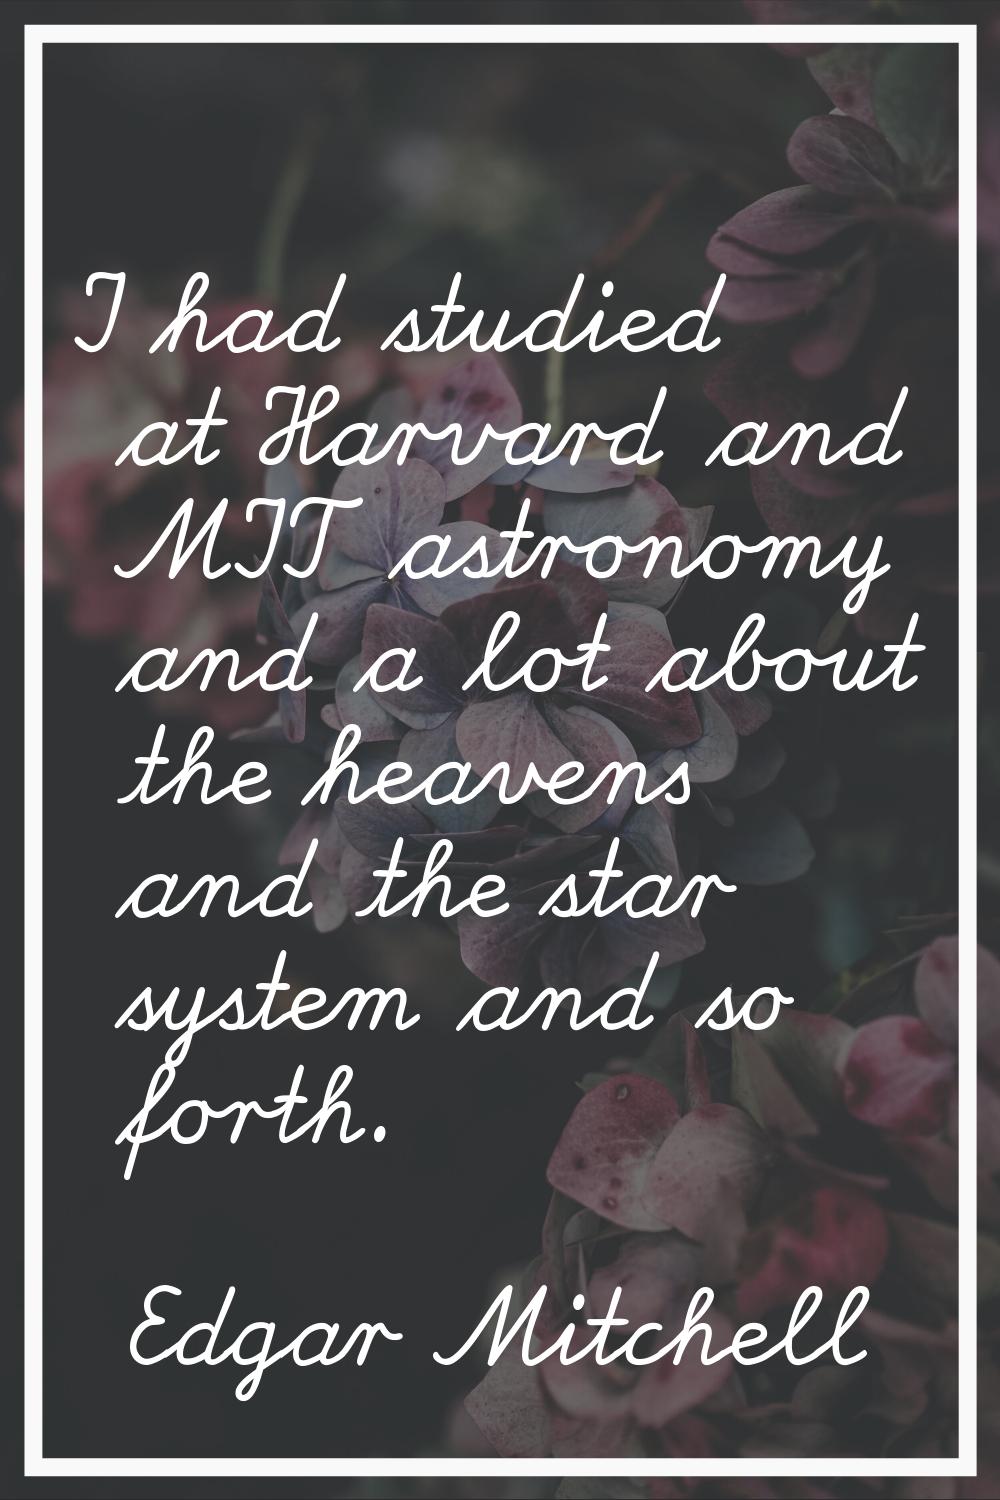 I had studied at Harvard and MIT astronomy and a lot about the heavens and the star system and so f